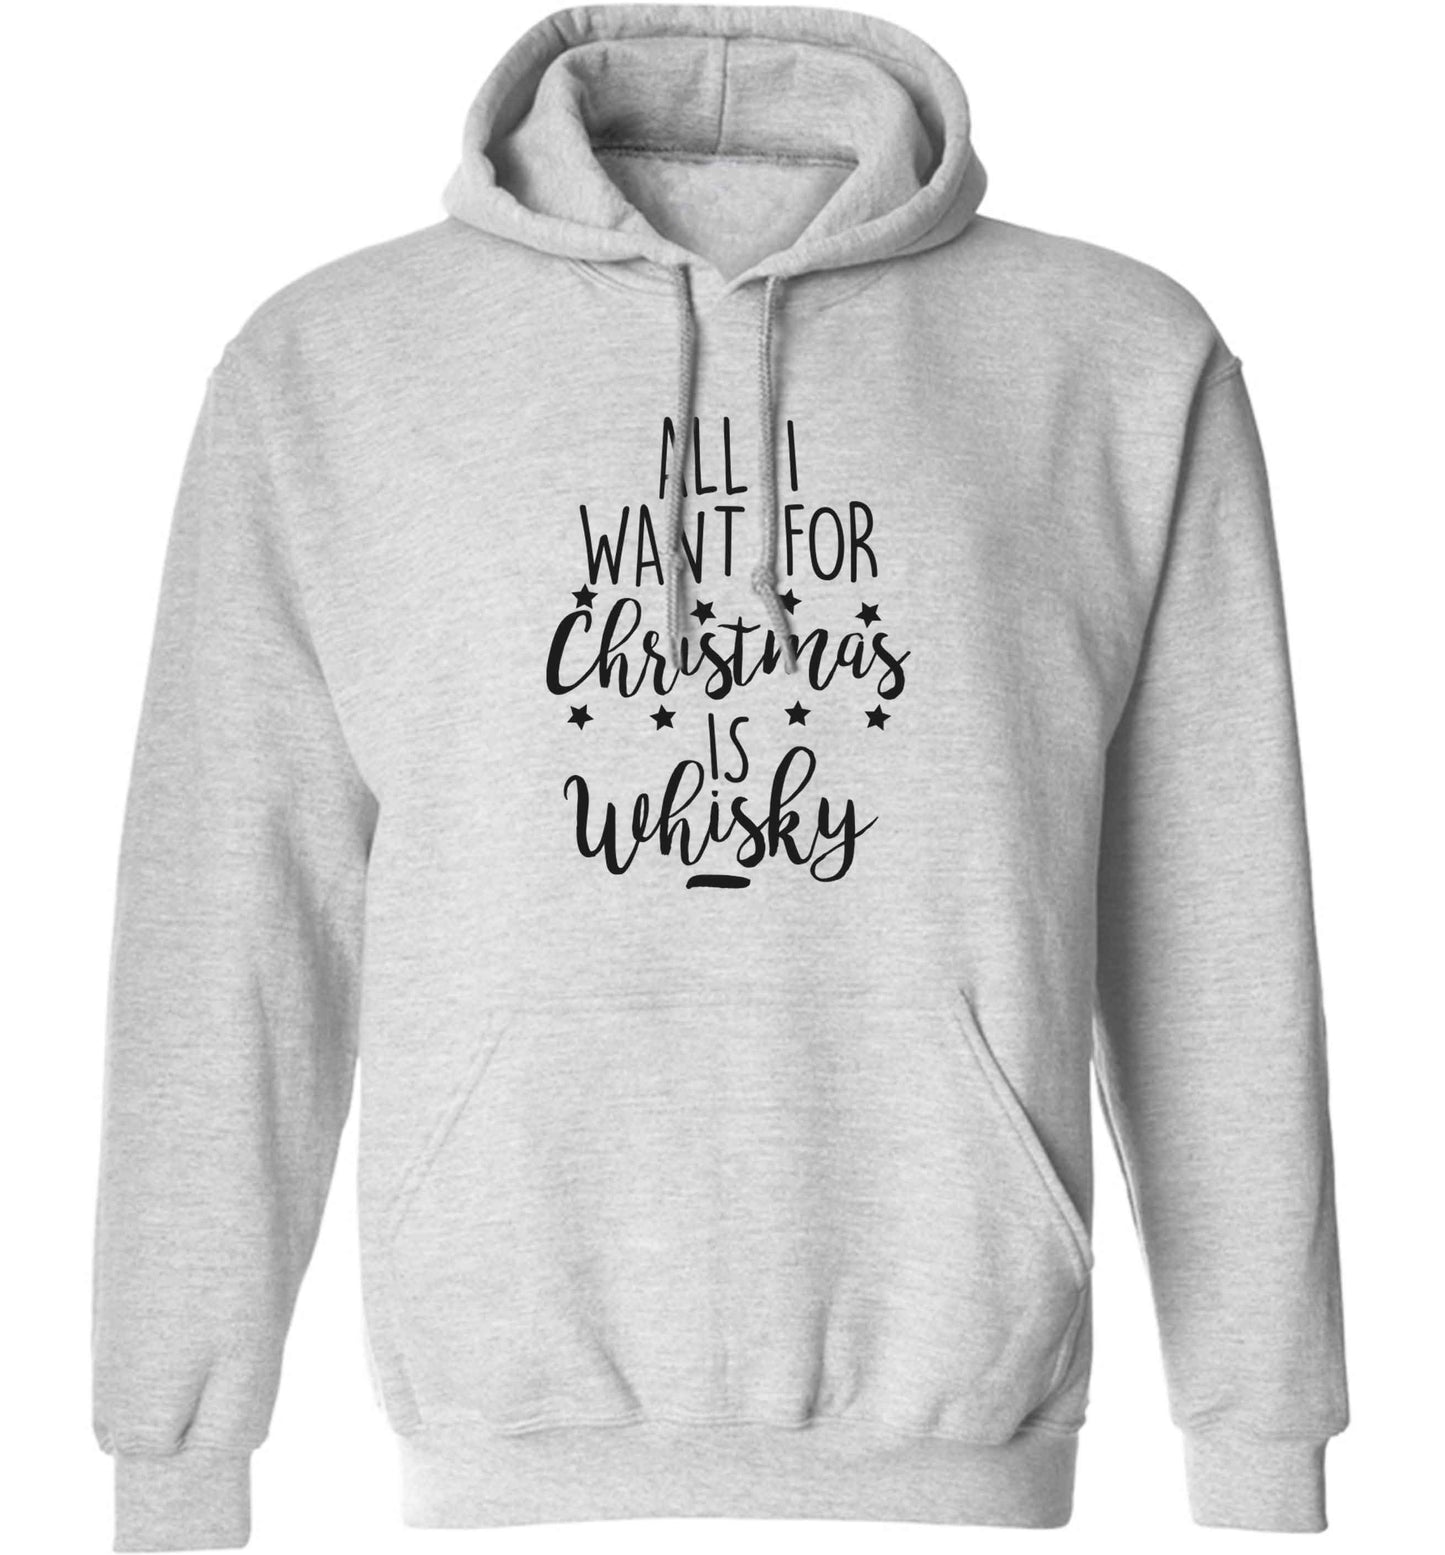 All I want for Christmas is whisky adults unisex grey hoodie 2XL